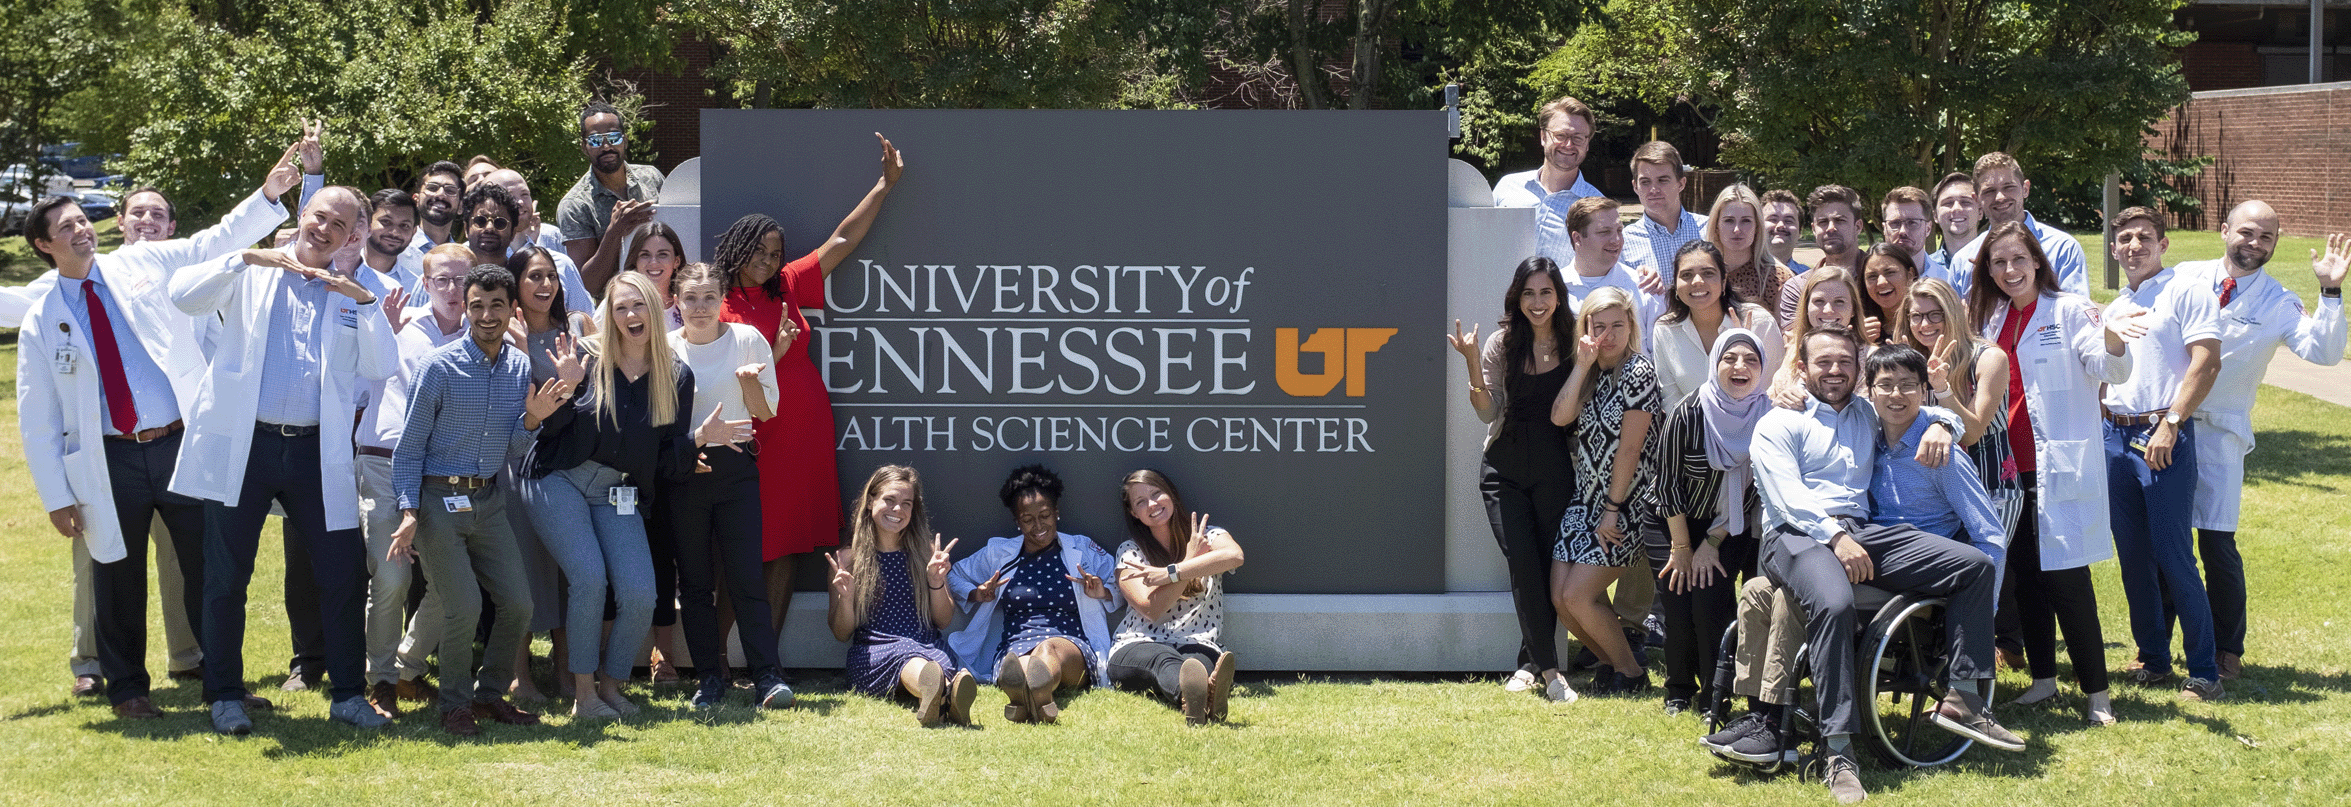 image of residents in front of an outdoor UTHSC sign